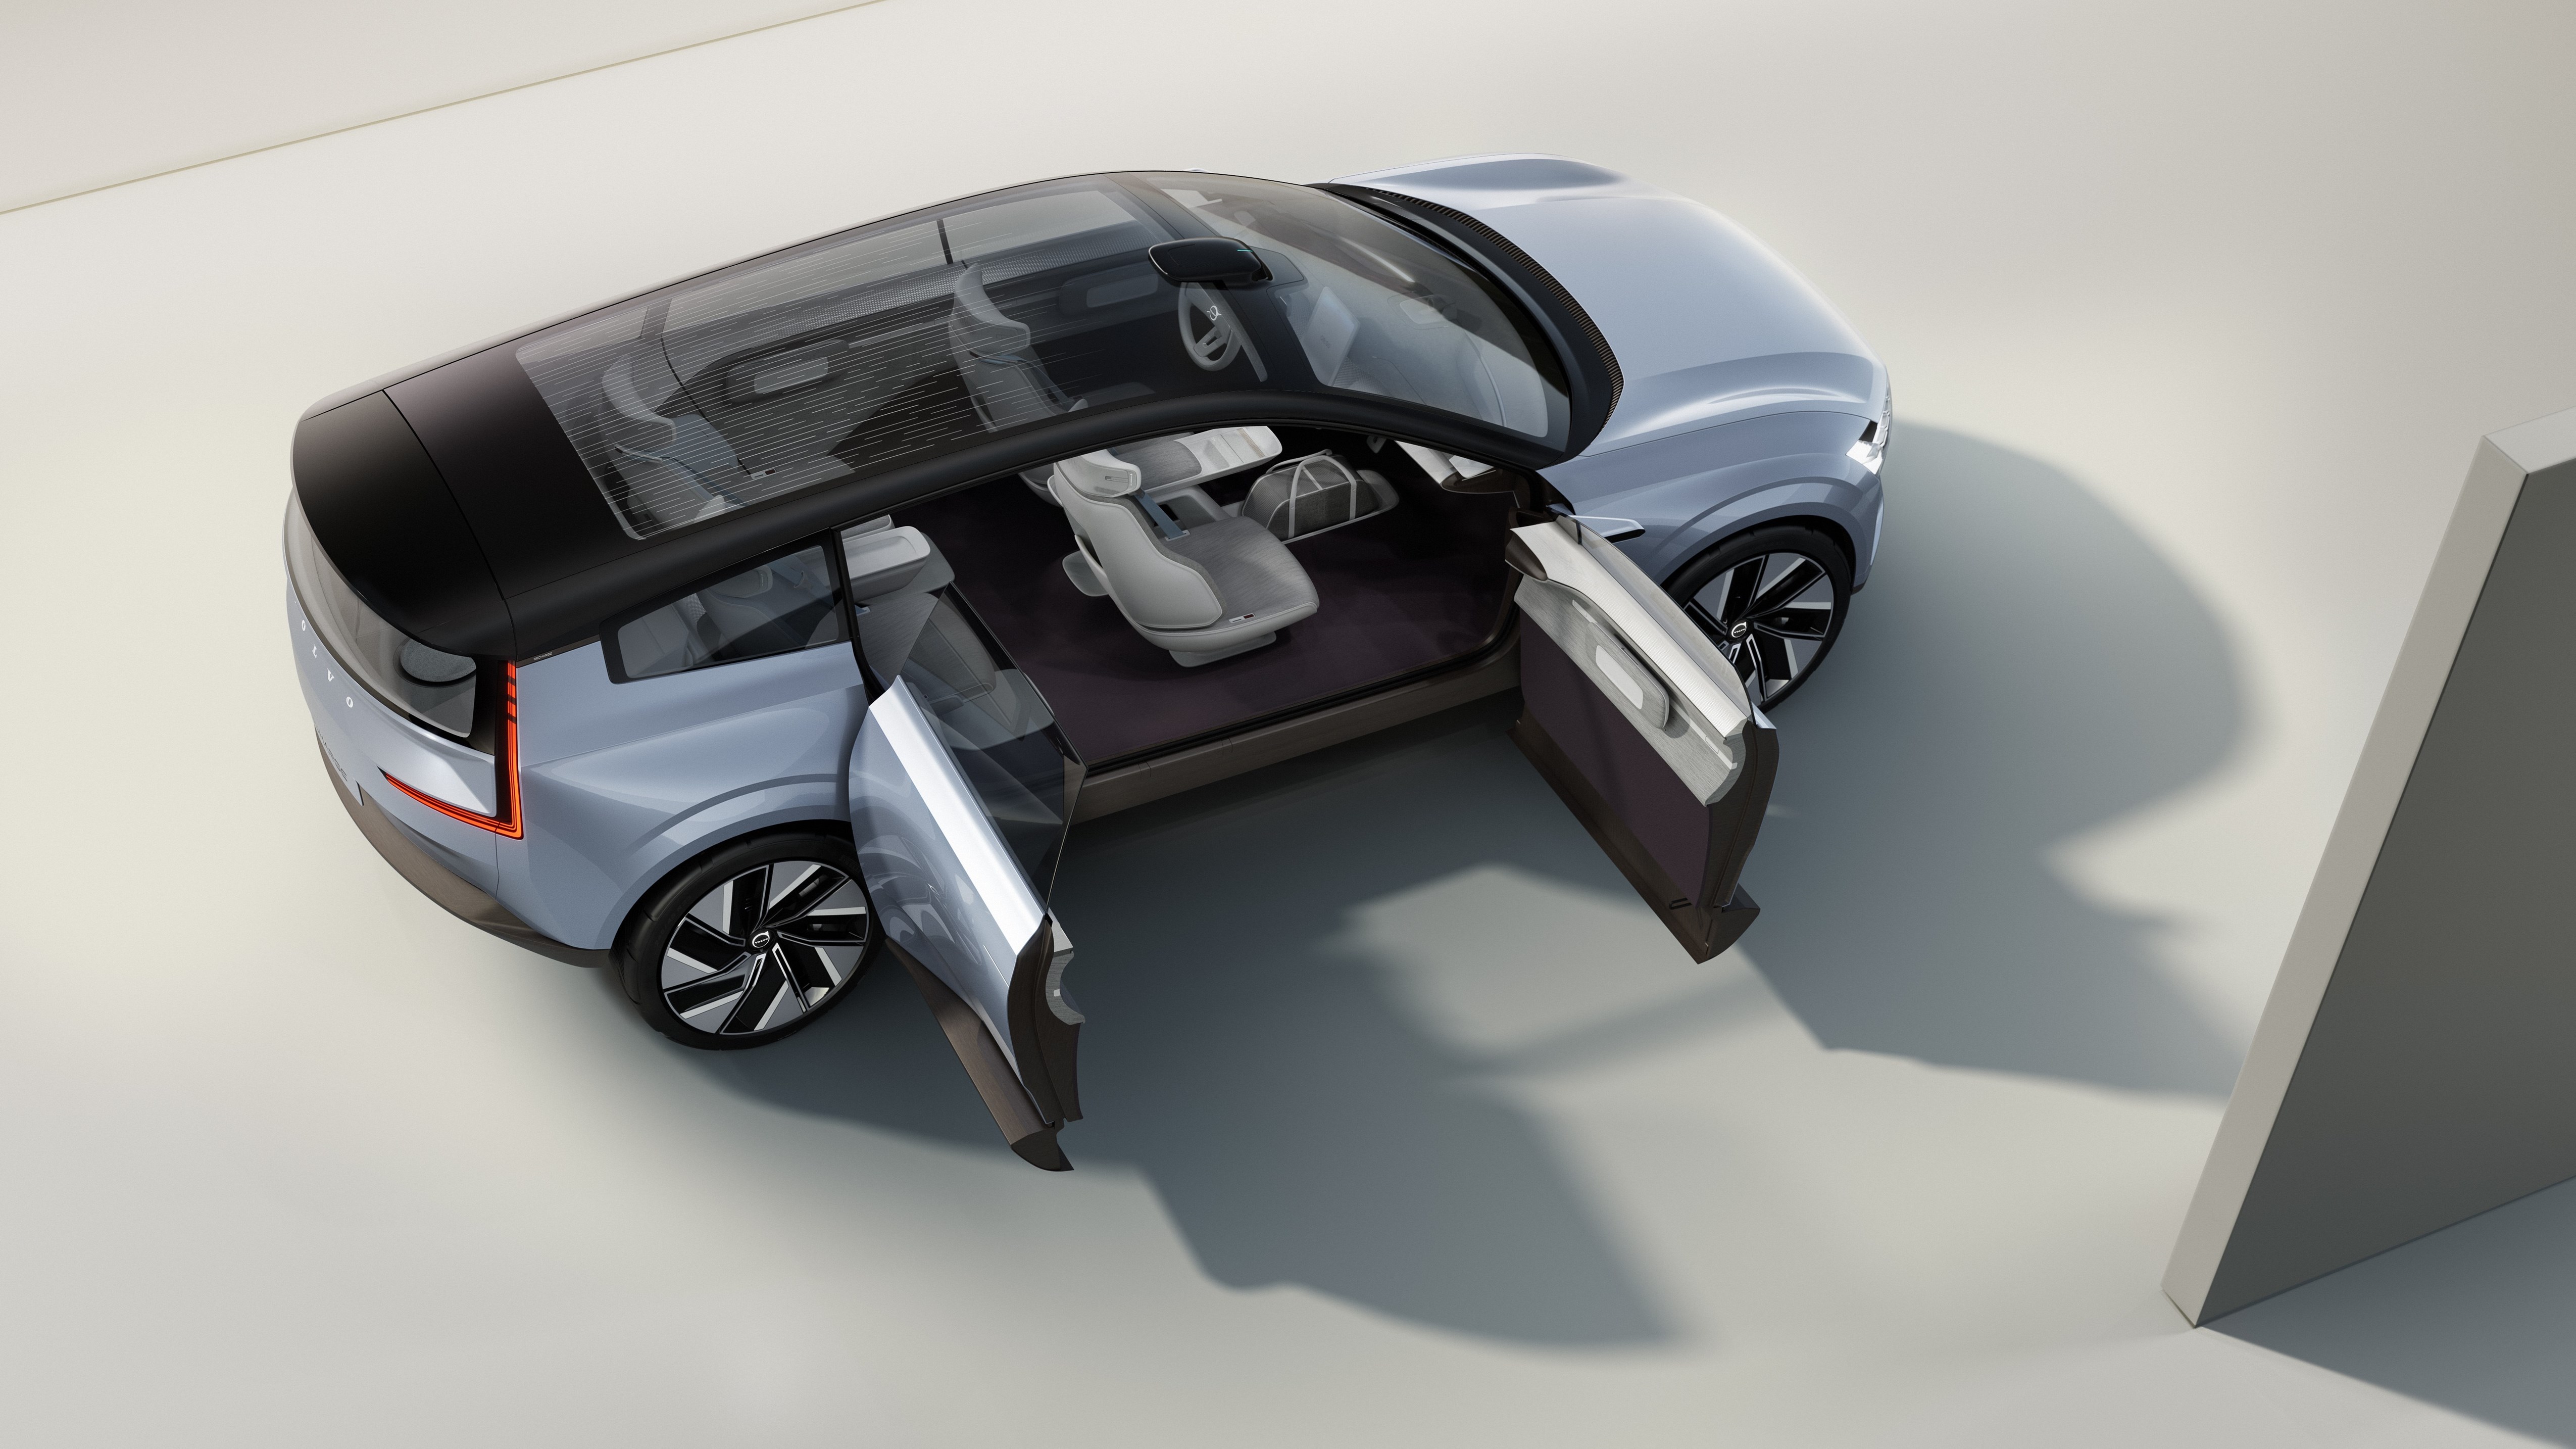 Volvo previews its allelectric future using its Concept Recharge EV